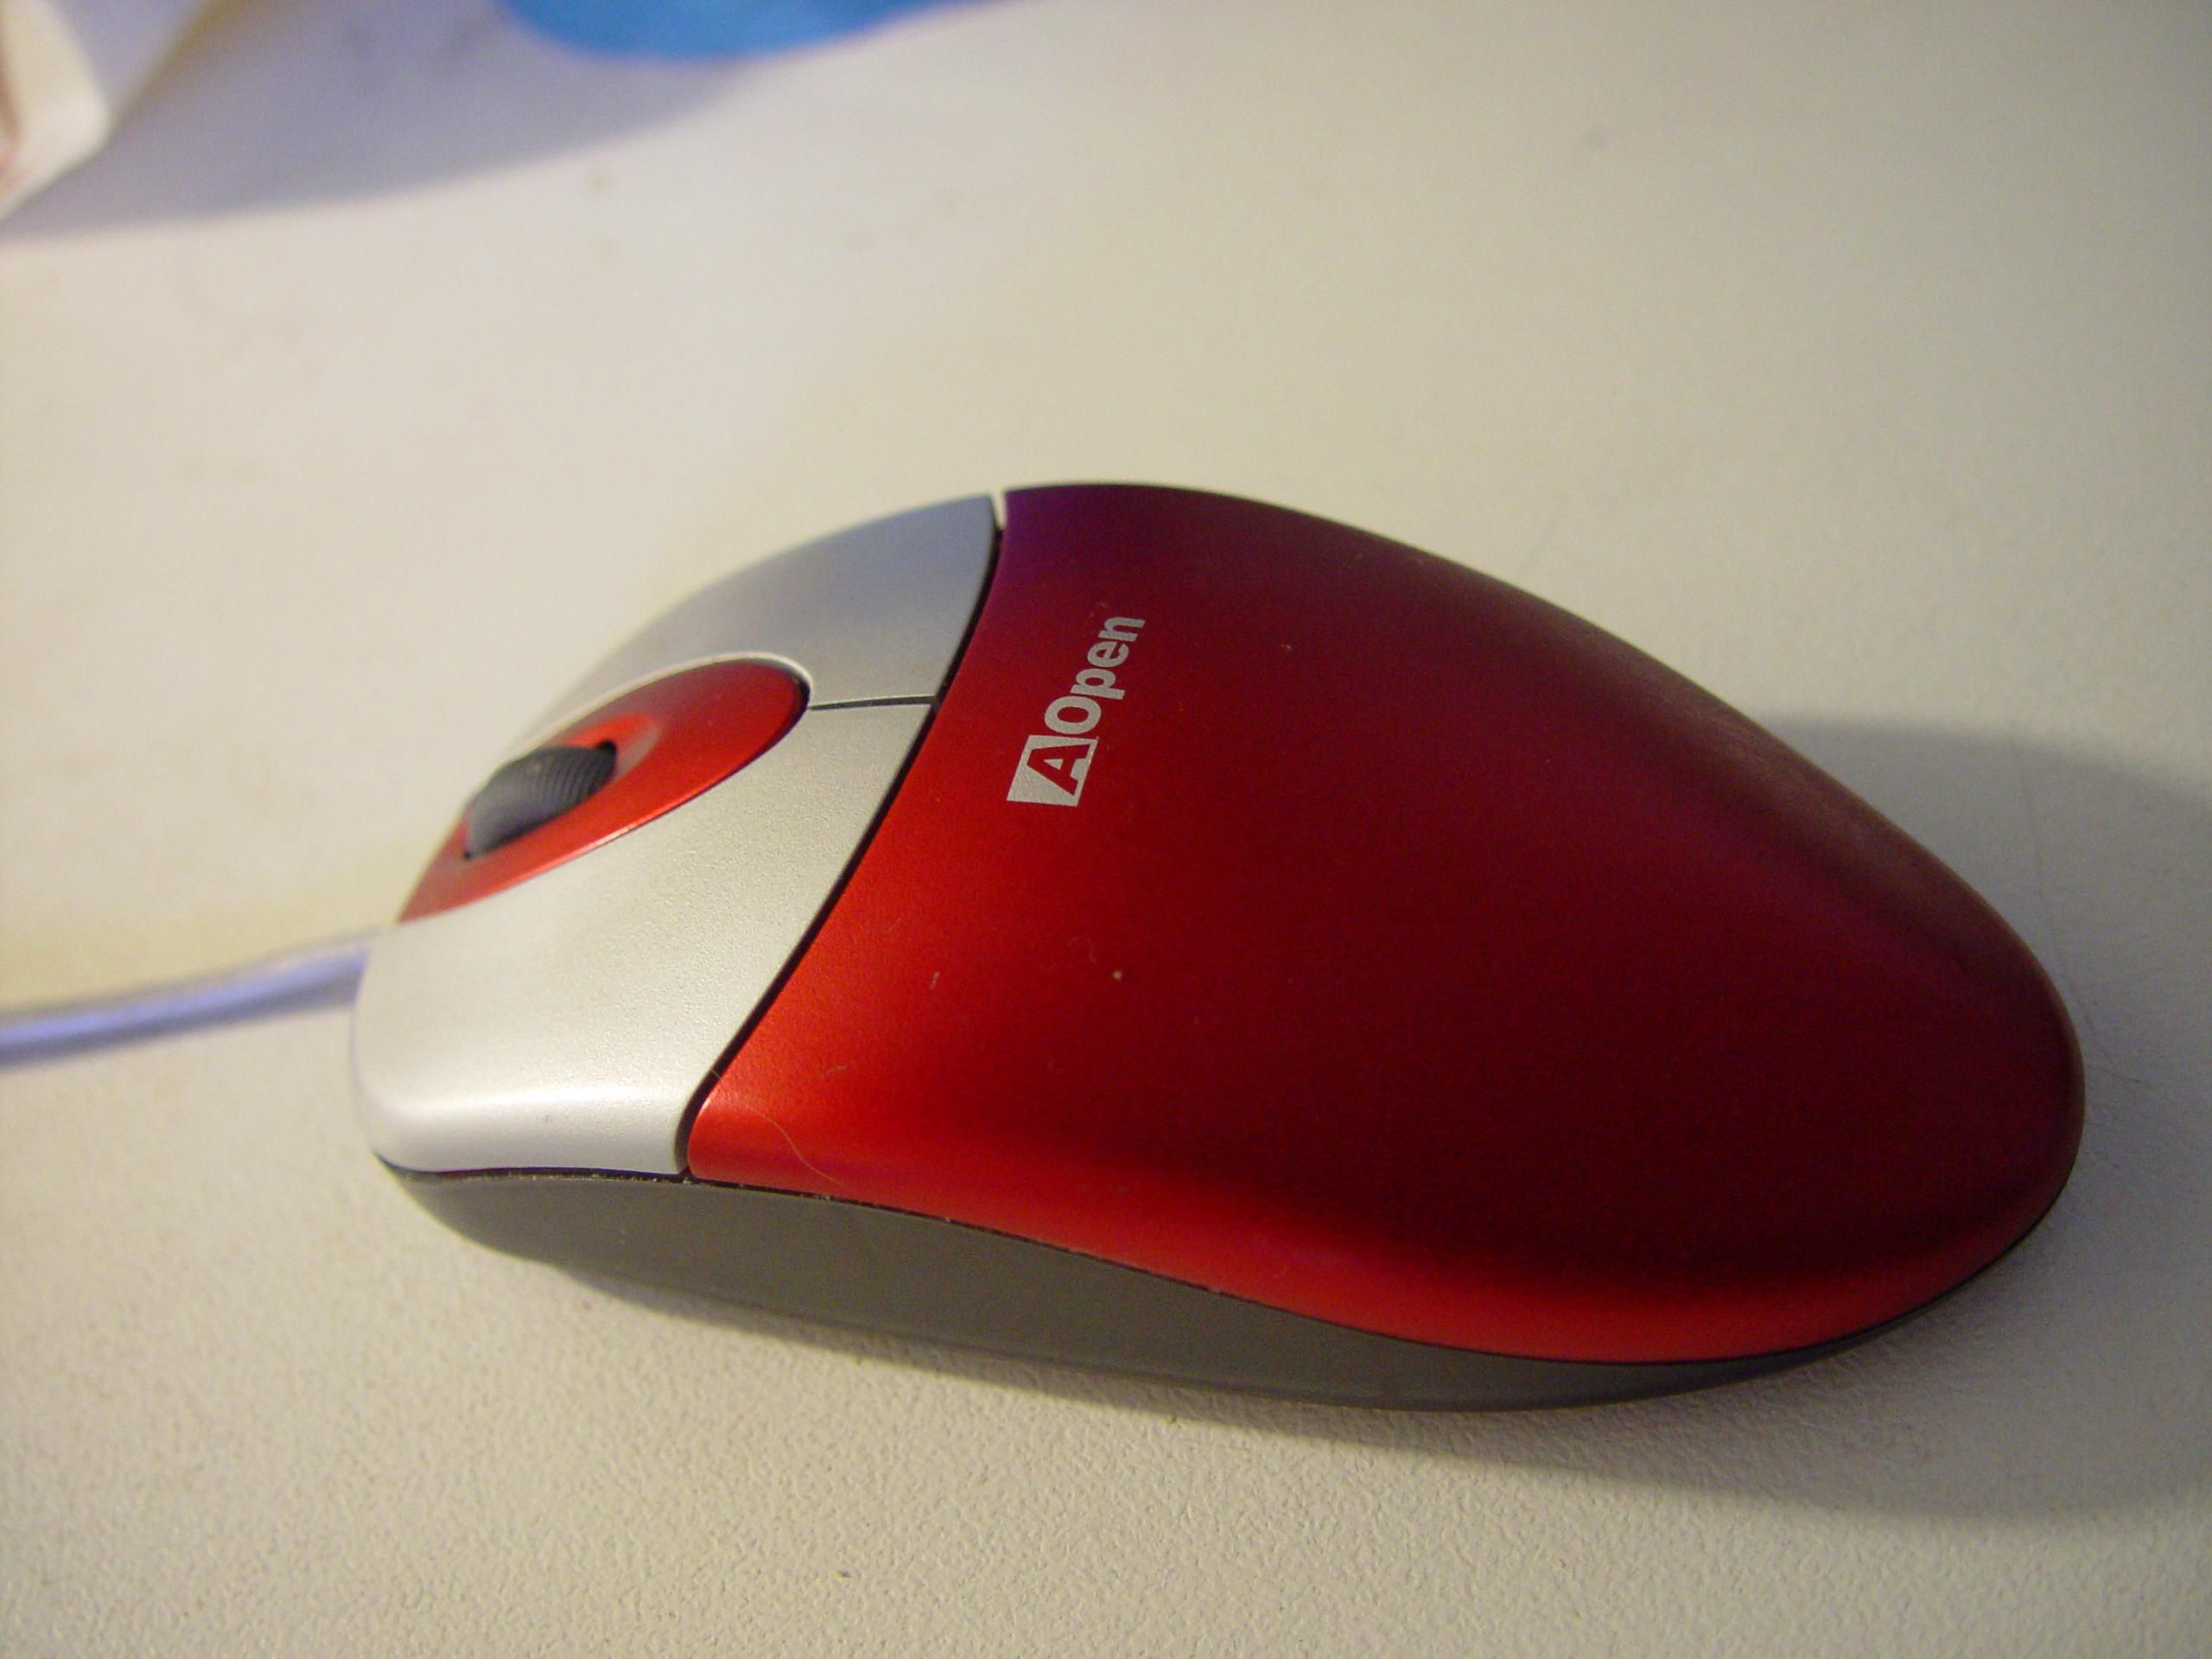 Red aopen computer optical mouse